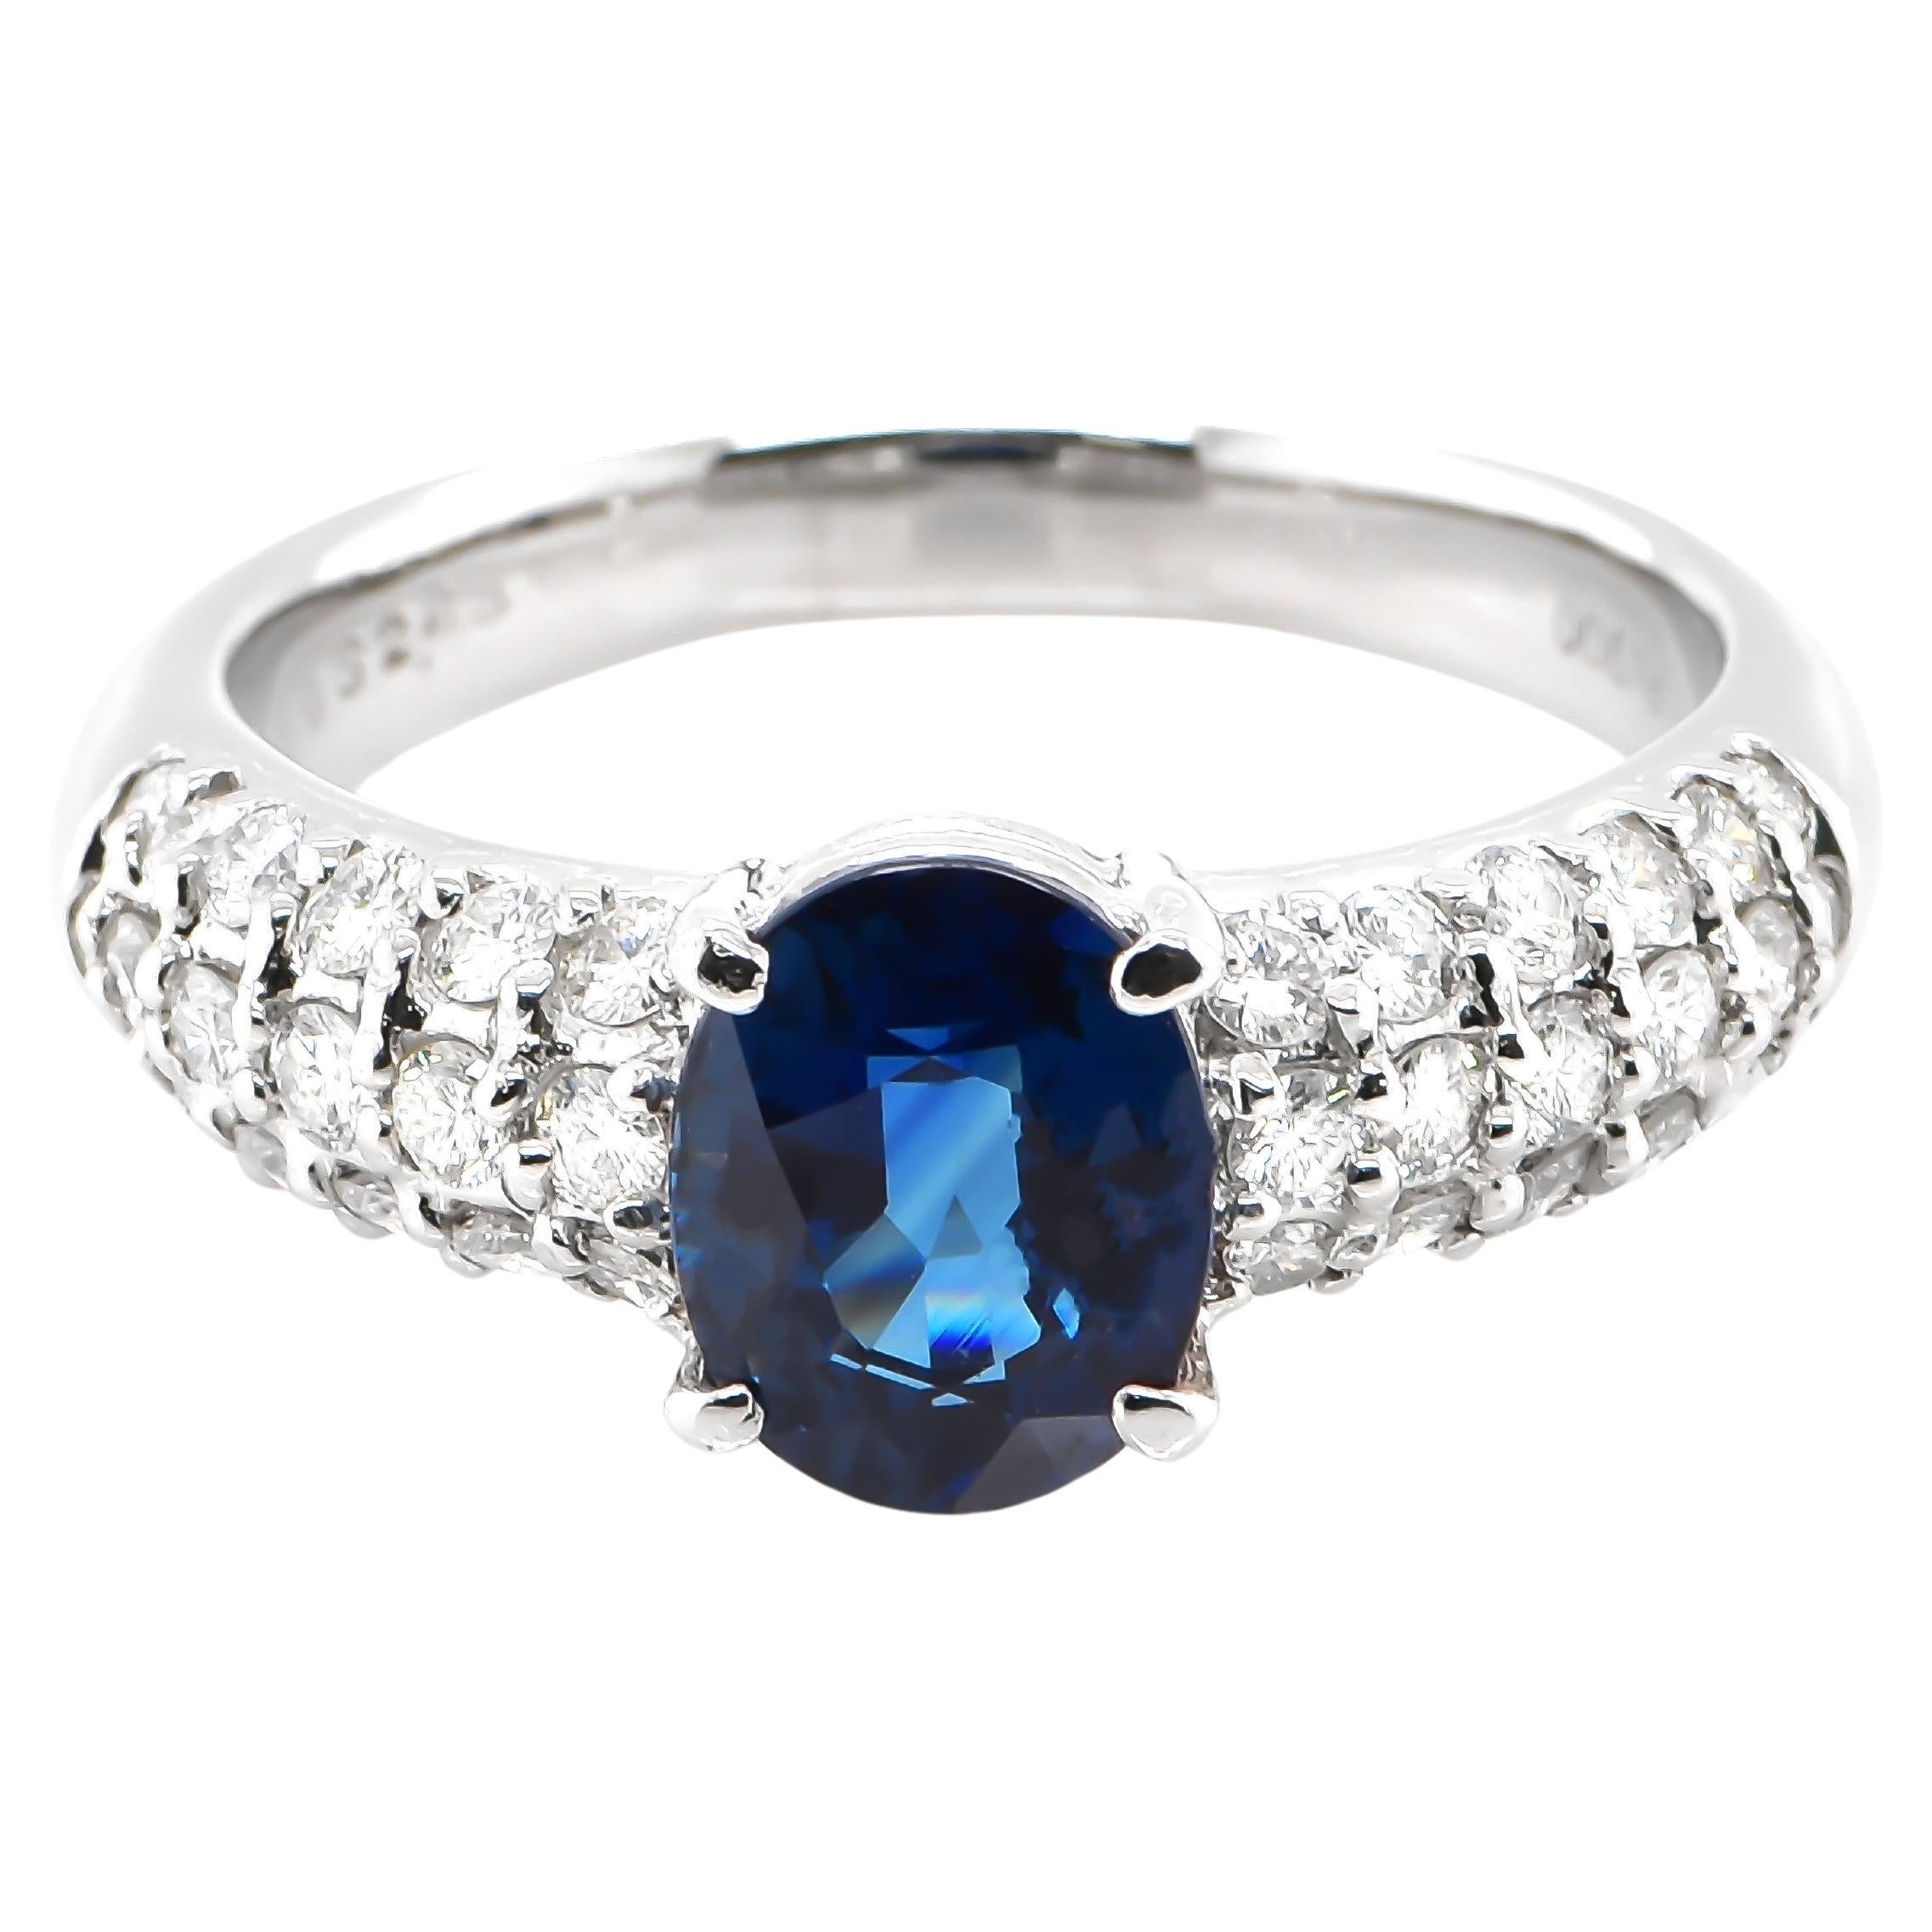 2.25 Carat Natural Blue Sapphire and Diamond Cocktail Ring Made in Platinum